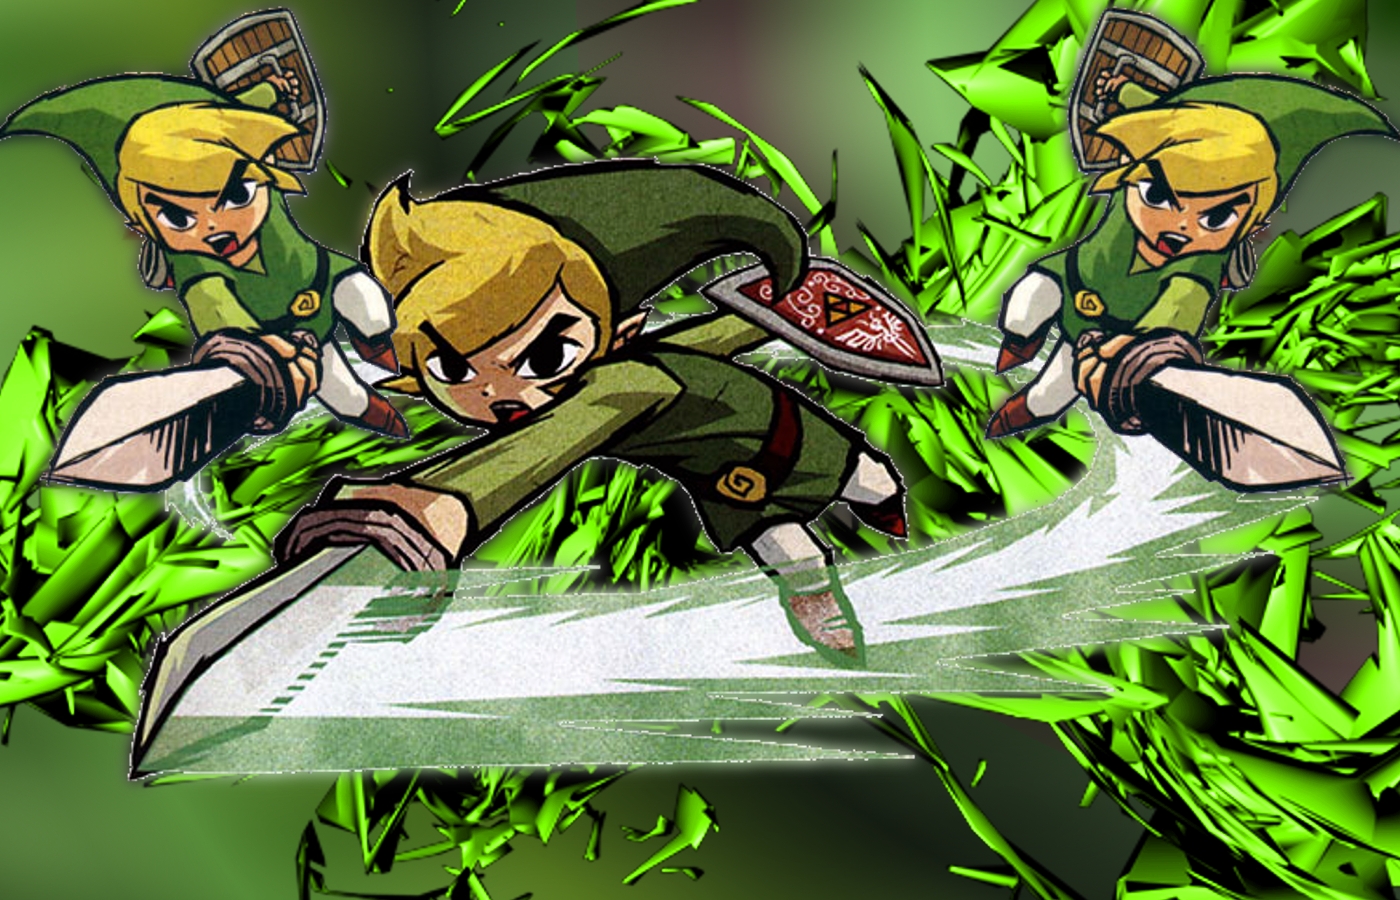 Toon Link Wallpaper By Kilroy567